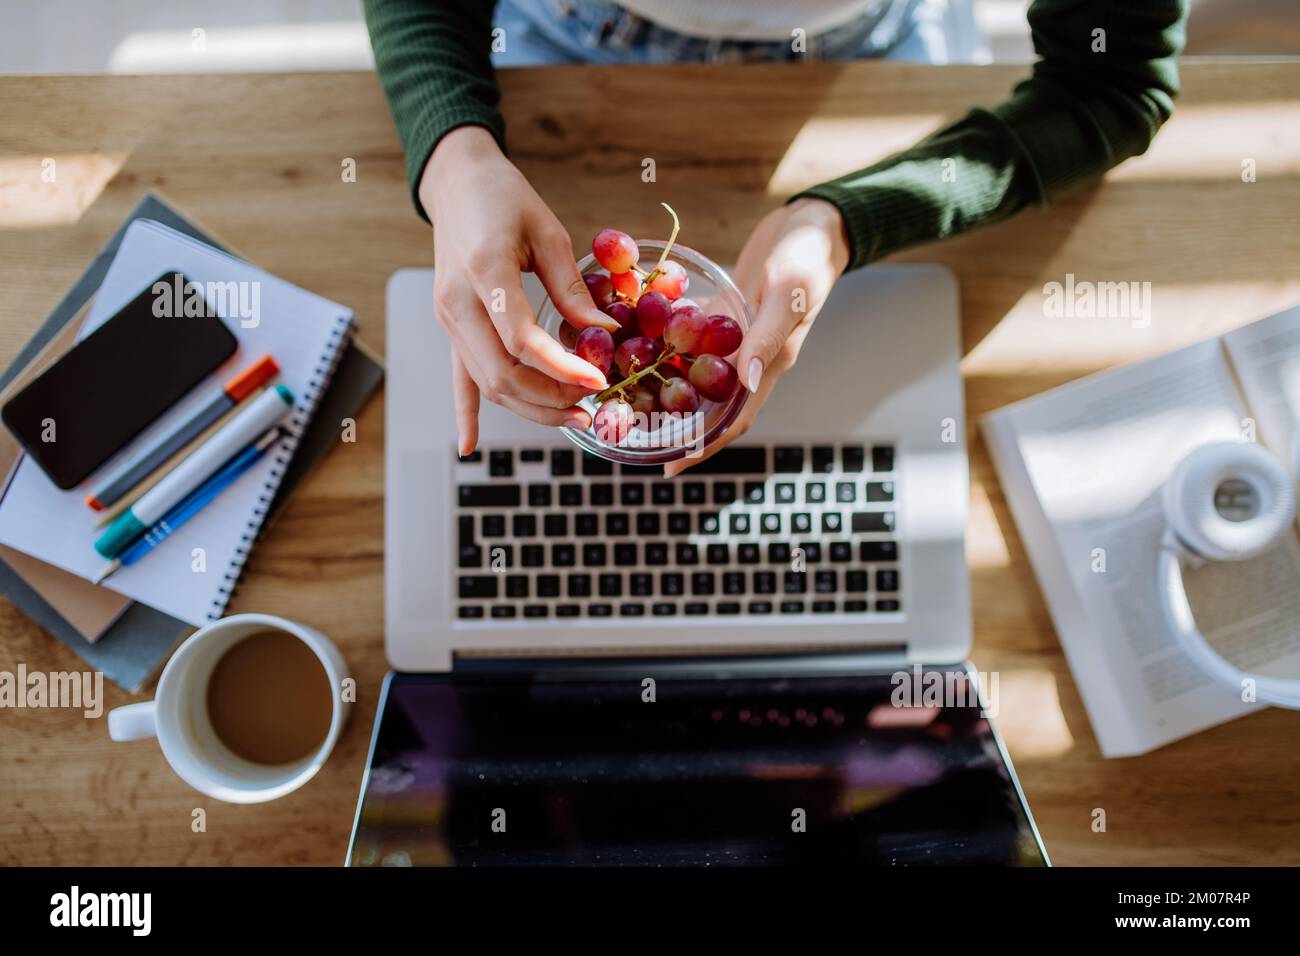 Top view of woman holding bowl with grapes above desk with computer, diary and smartphone. Work-life balance concept. Stock Photo